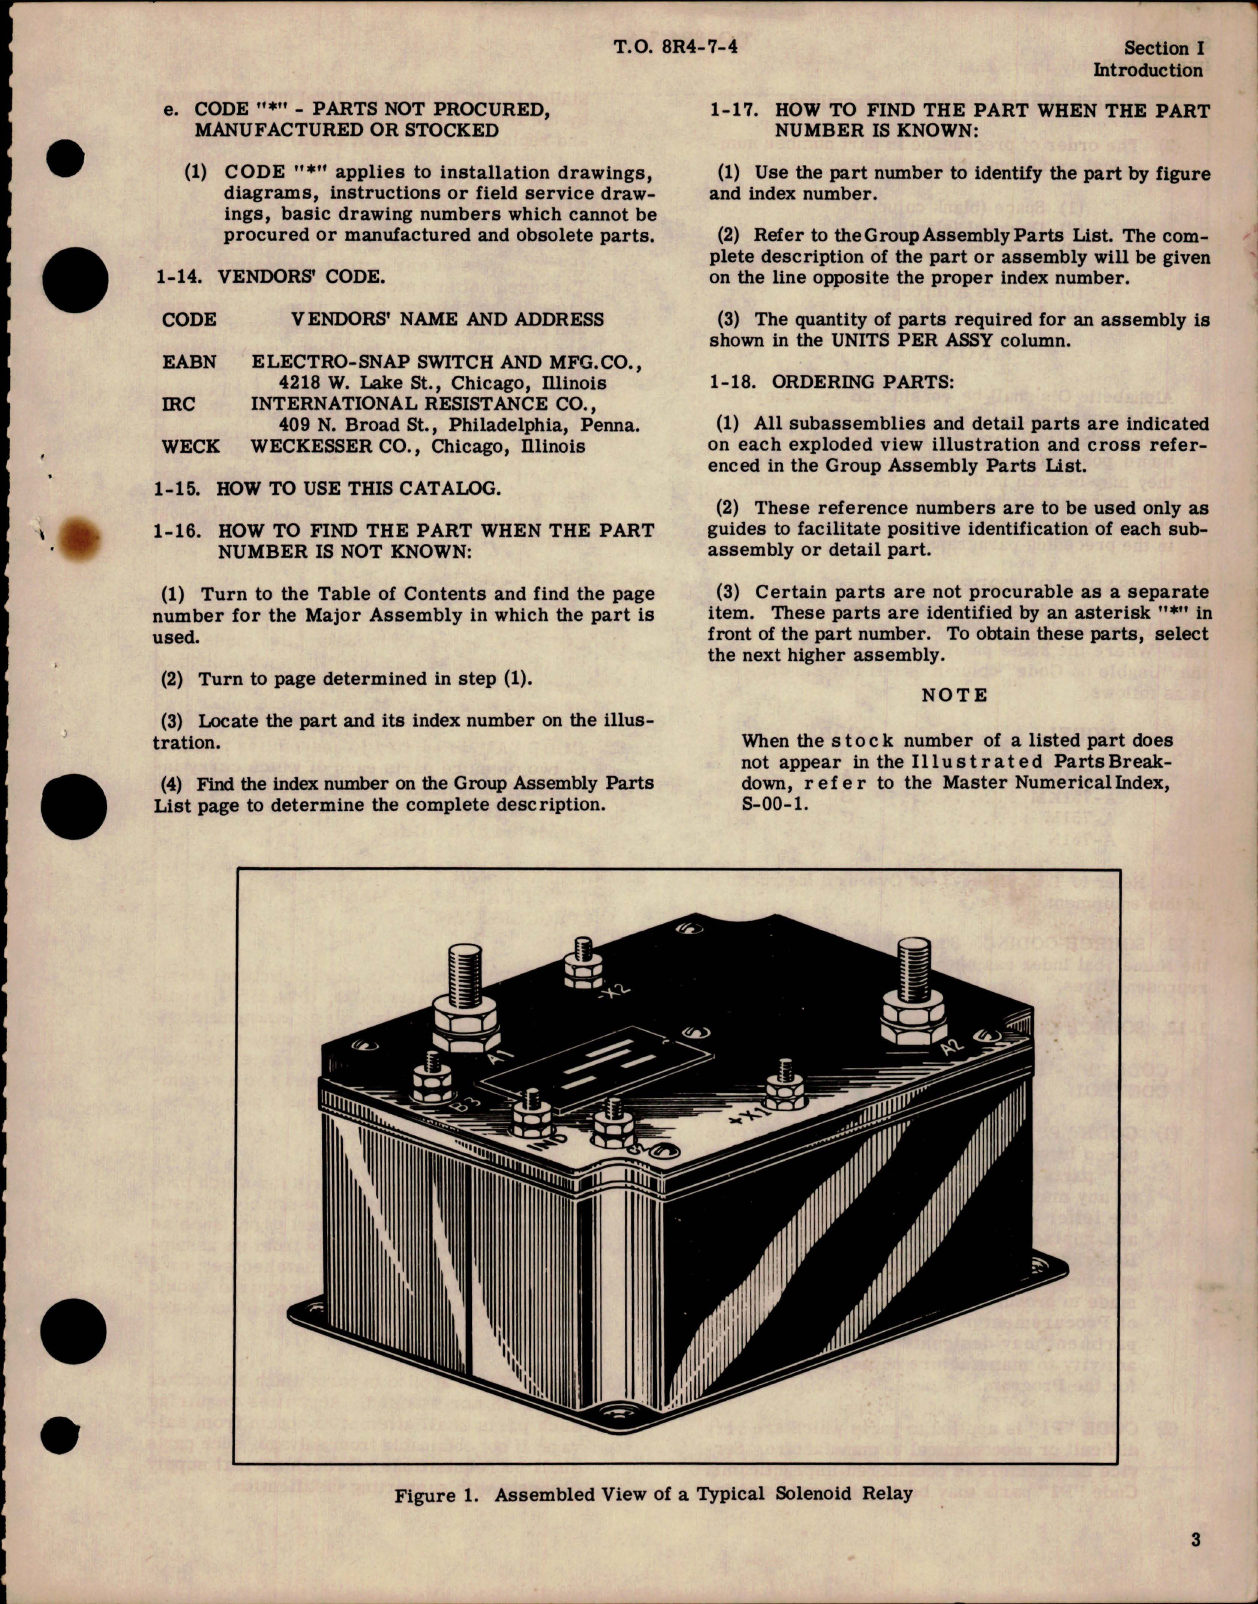 Sample page 5 from AirCorps Library document: Illustrated Parts Breakdown for Solenoid Relay - Type T-1